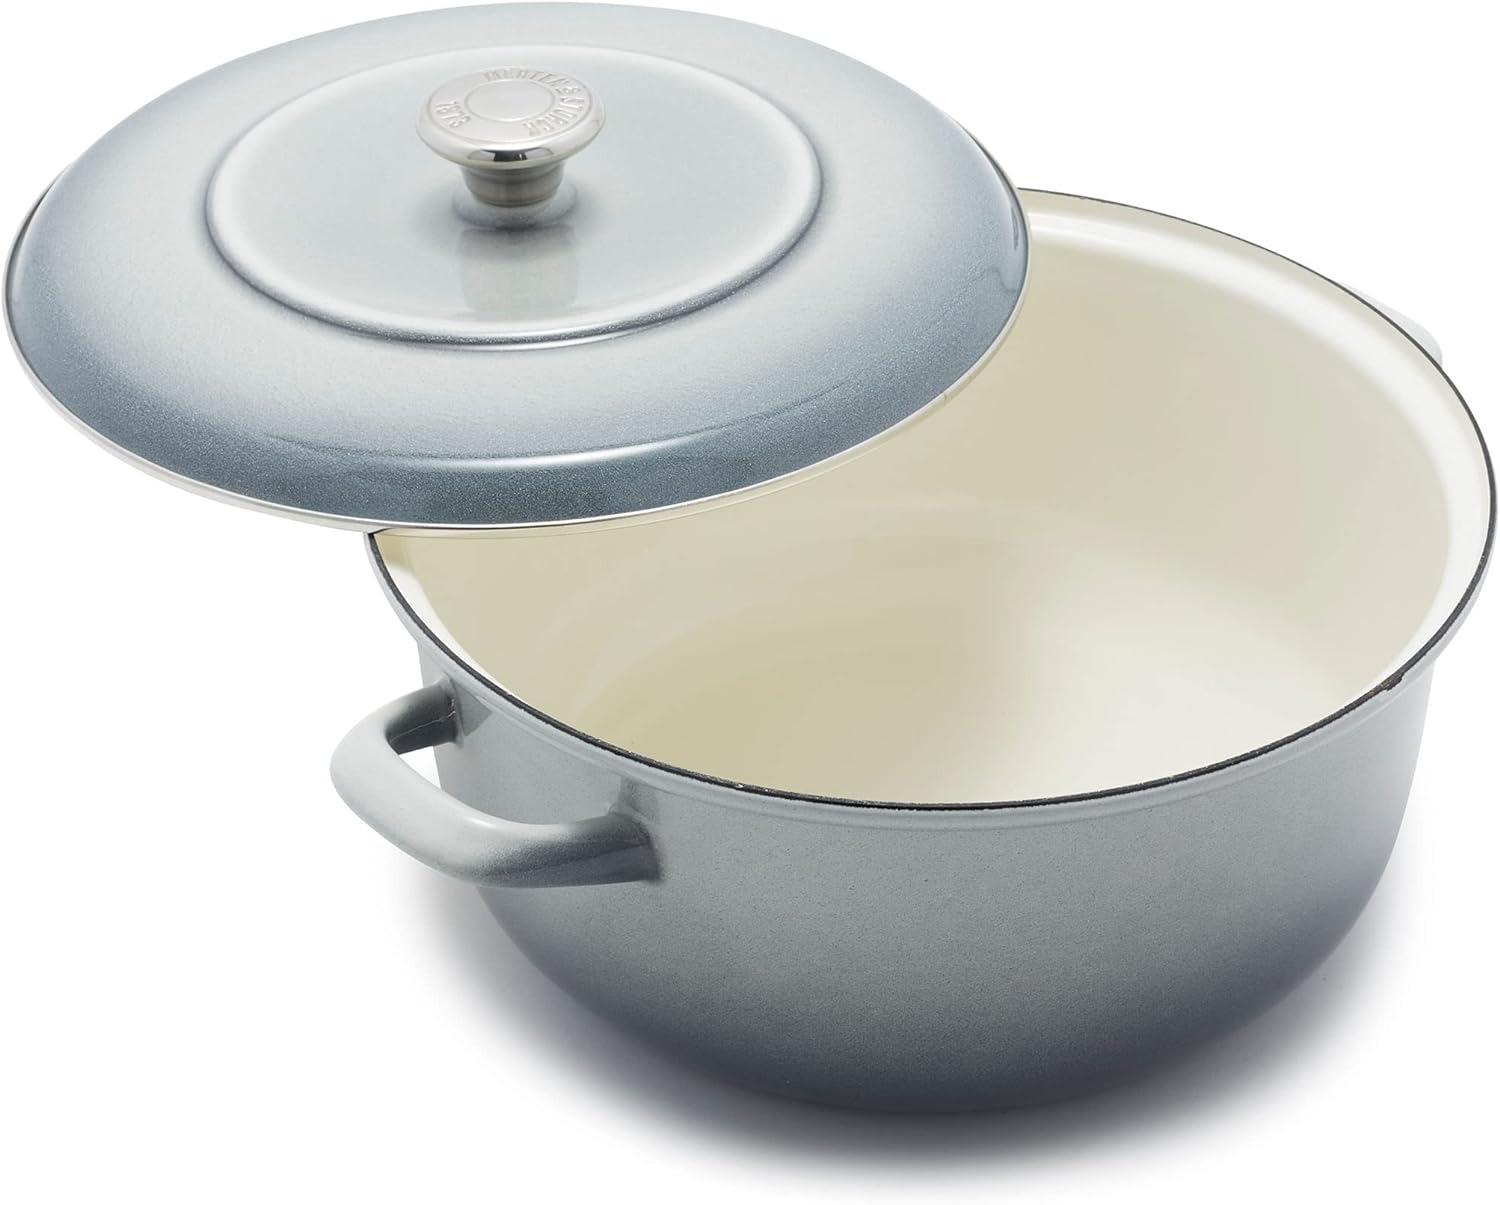 German Enameled Iron, round 5.3QT Dutch Oven Pot with Lid, Cloud Gray